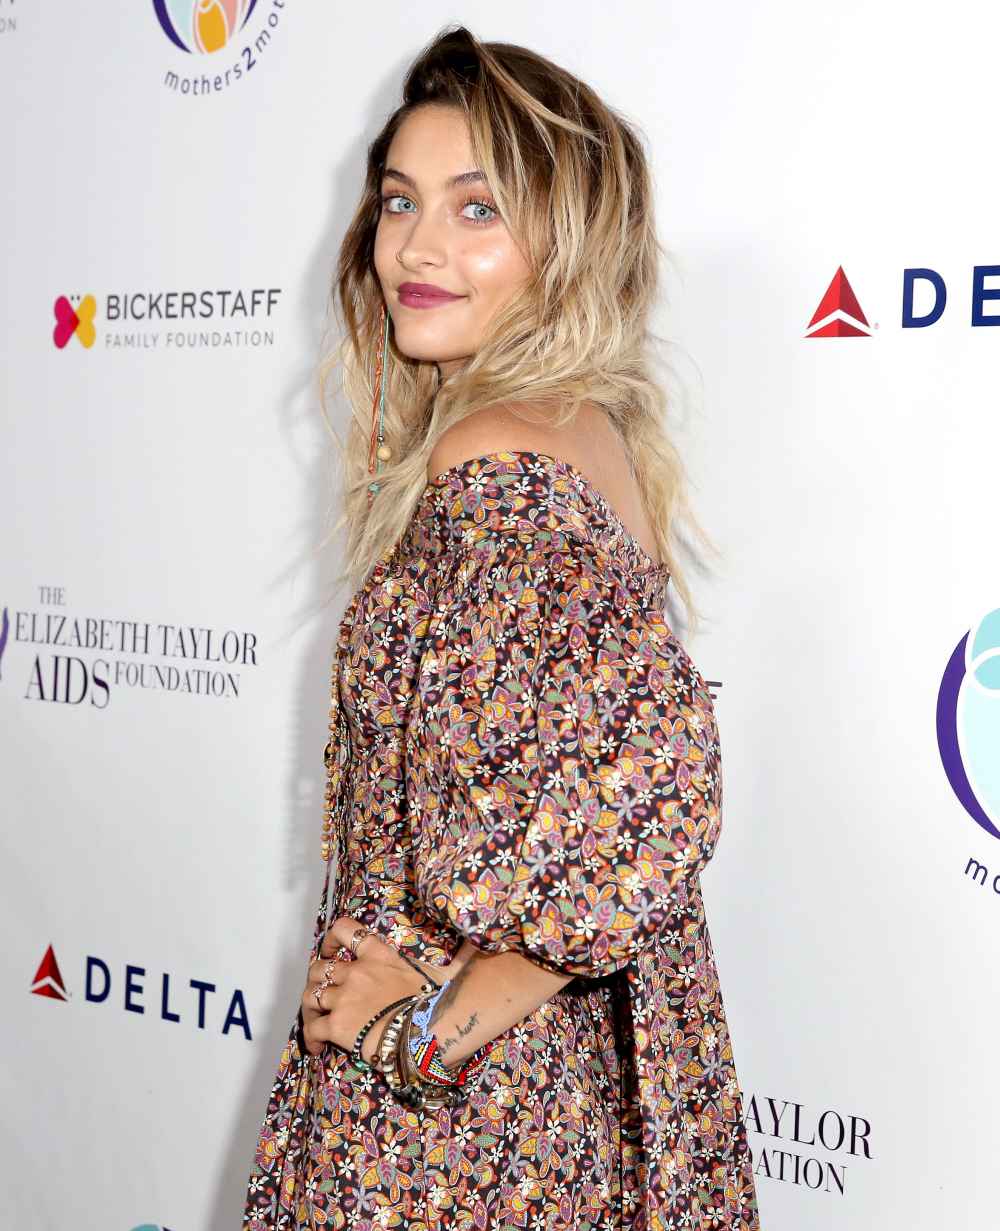 Paris Jackson attends The Elizabeth Taylor AIDS Foundation and mothers2mothers dinner